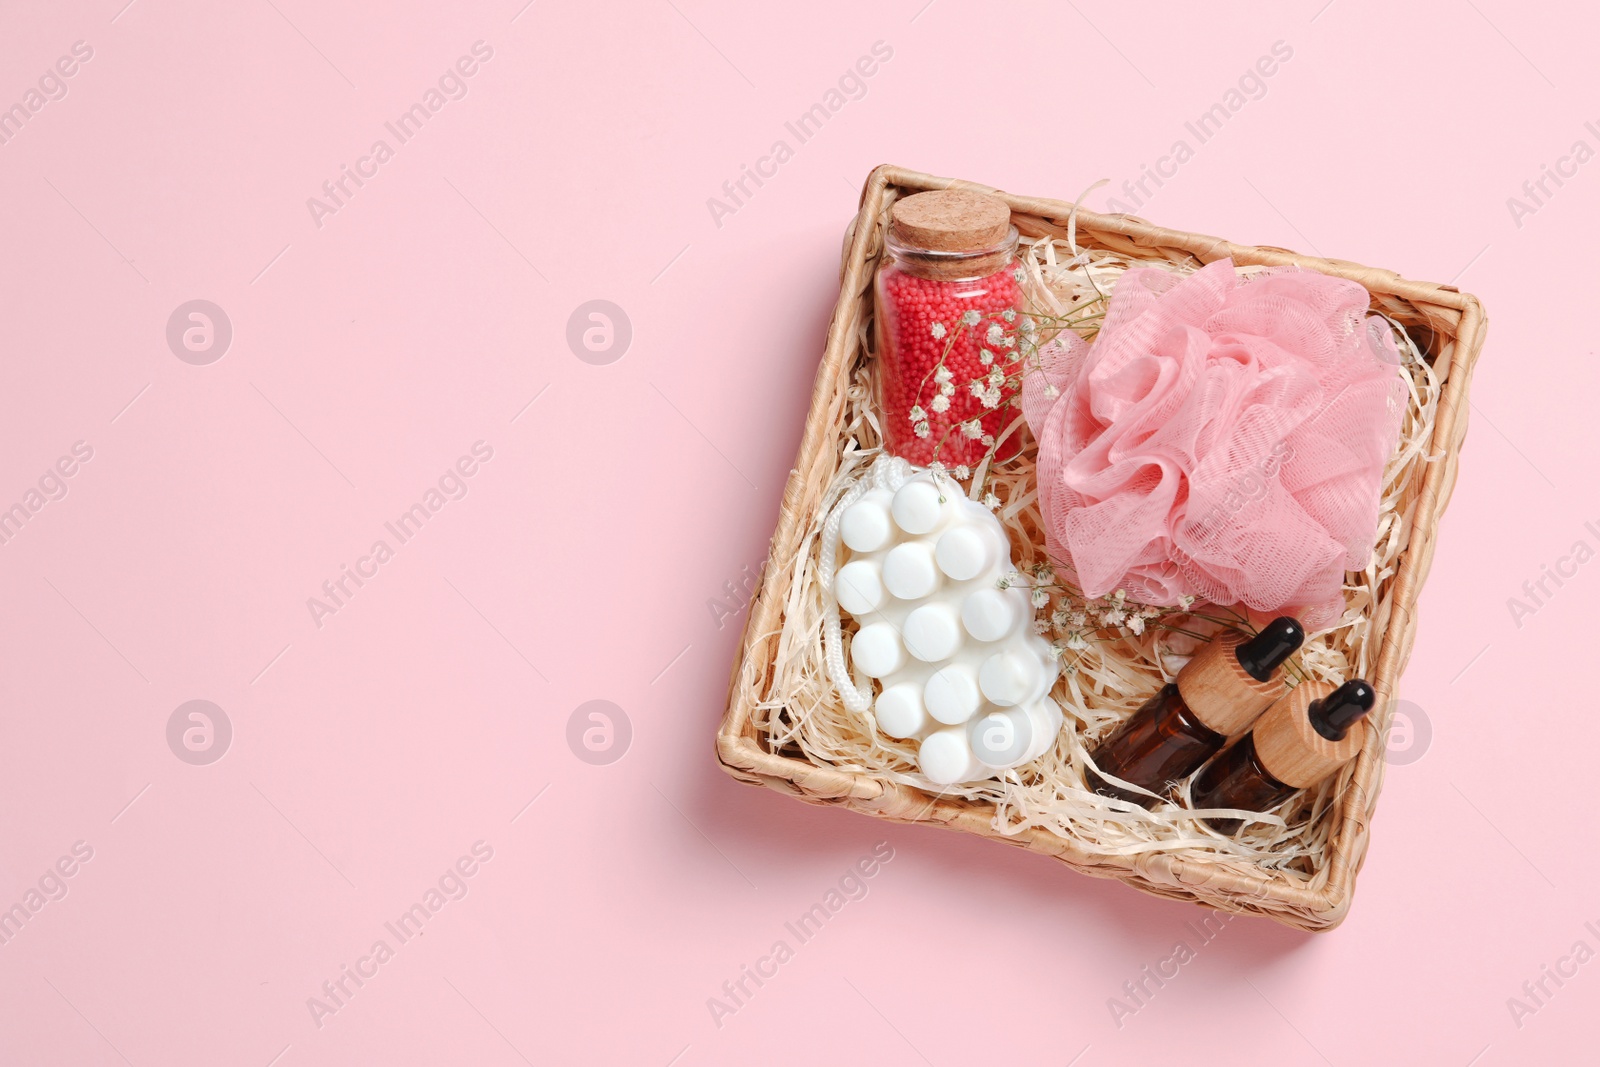 Photo of Spa gift set of different luxury products in wicker basket on pale pink background, top view. Space for text